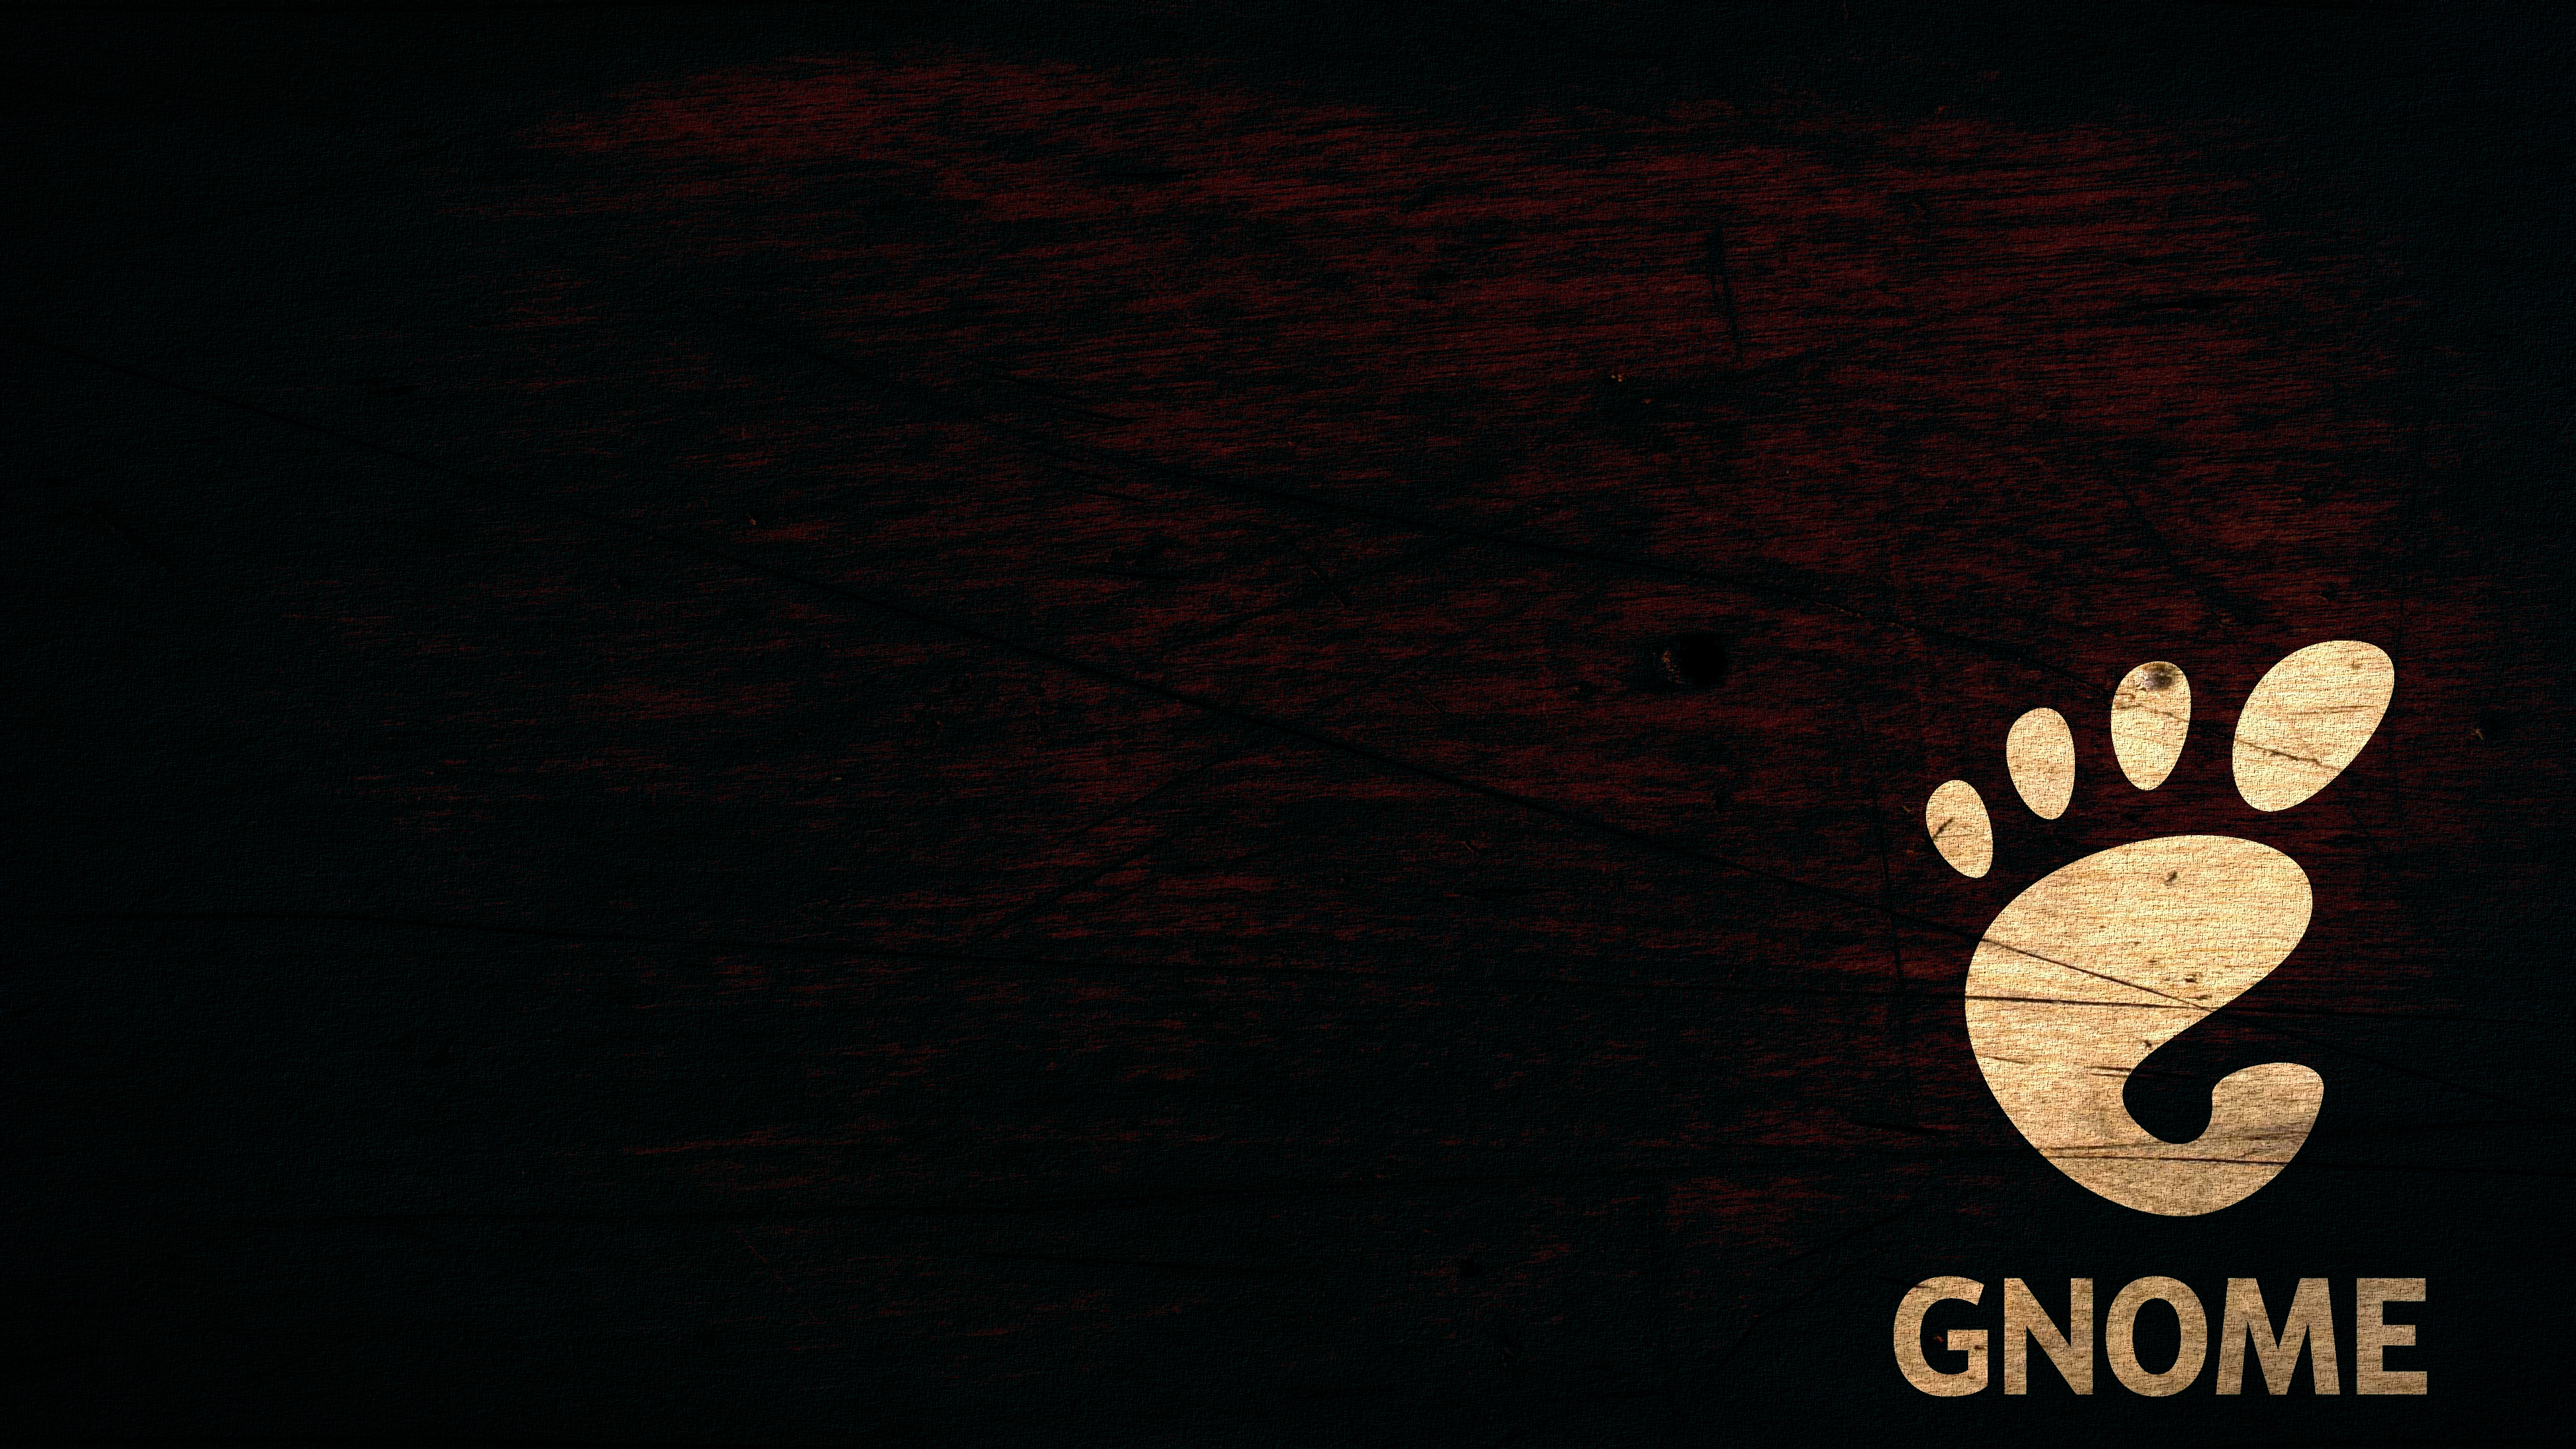 General 3840x2160 abstract GNOME dark wood Linux